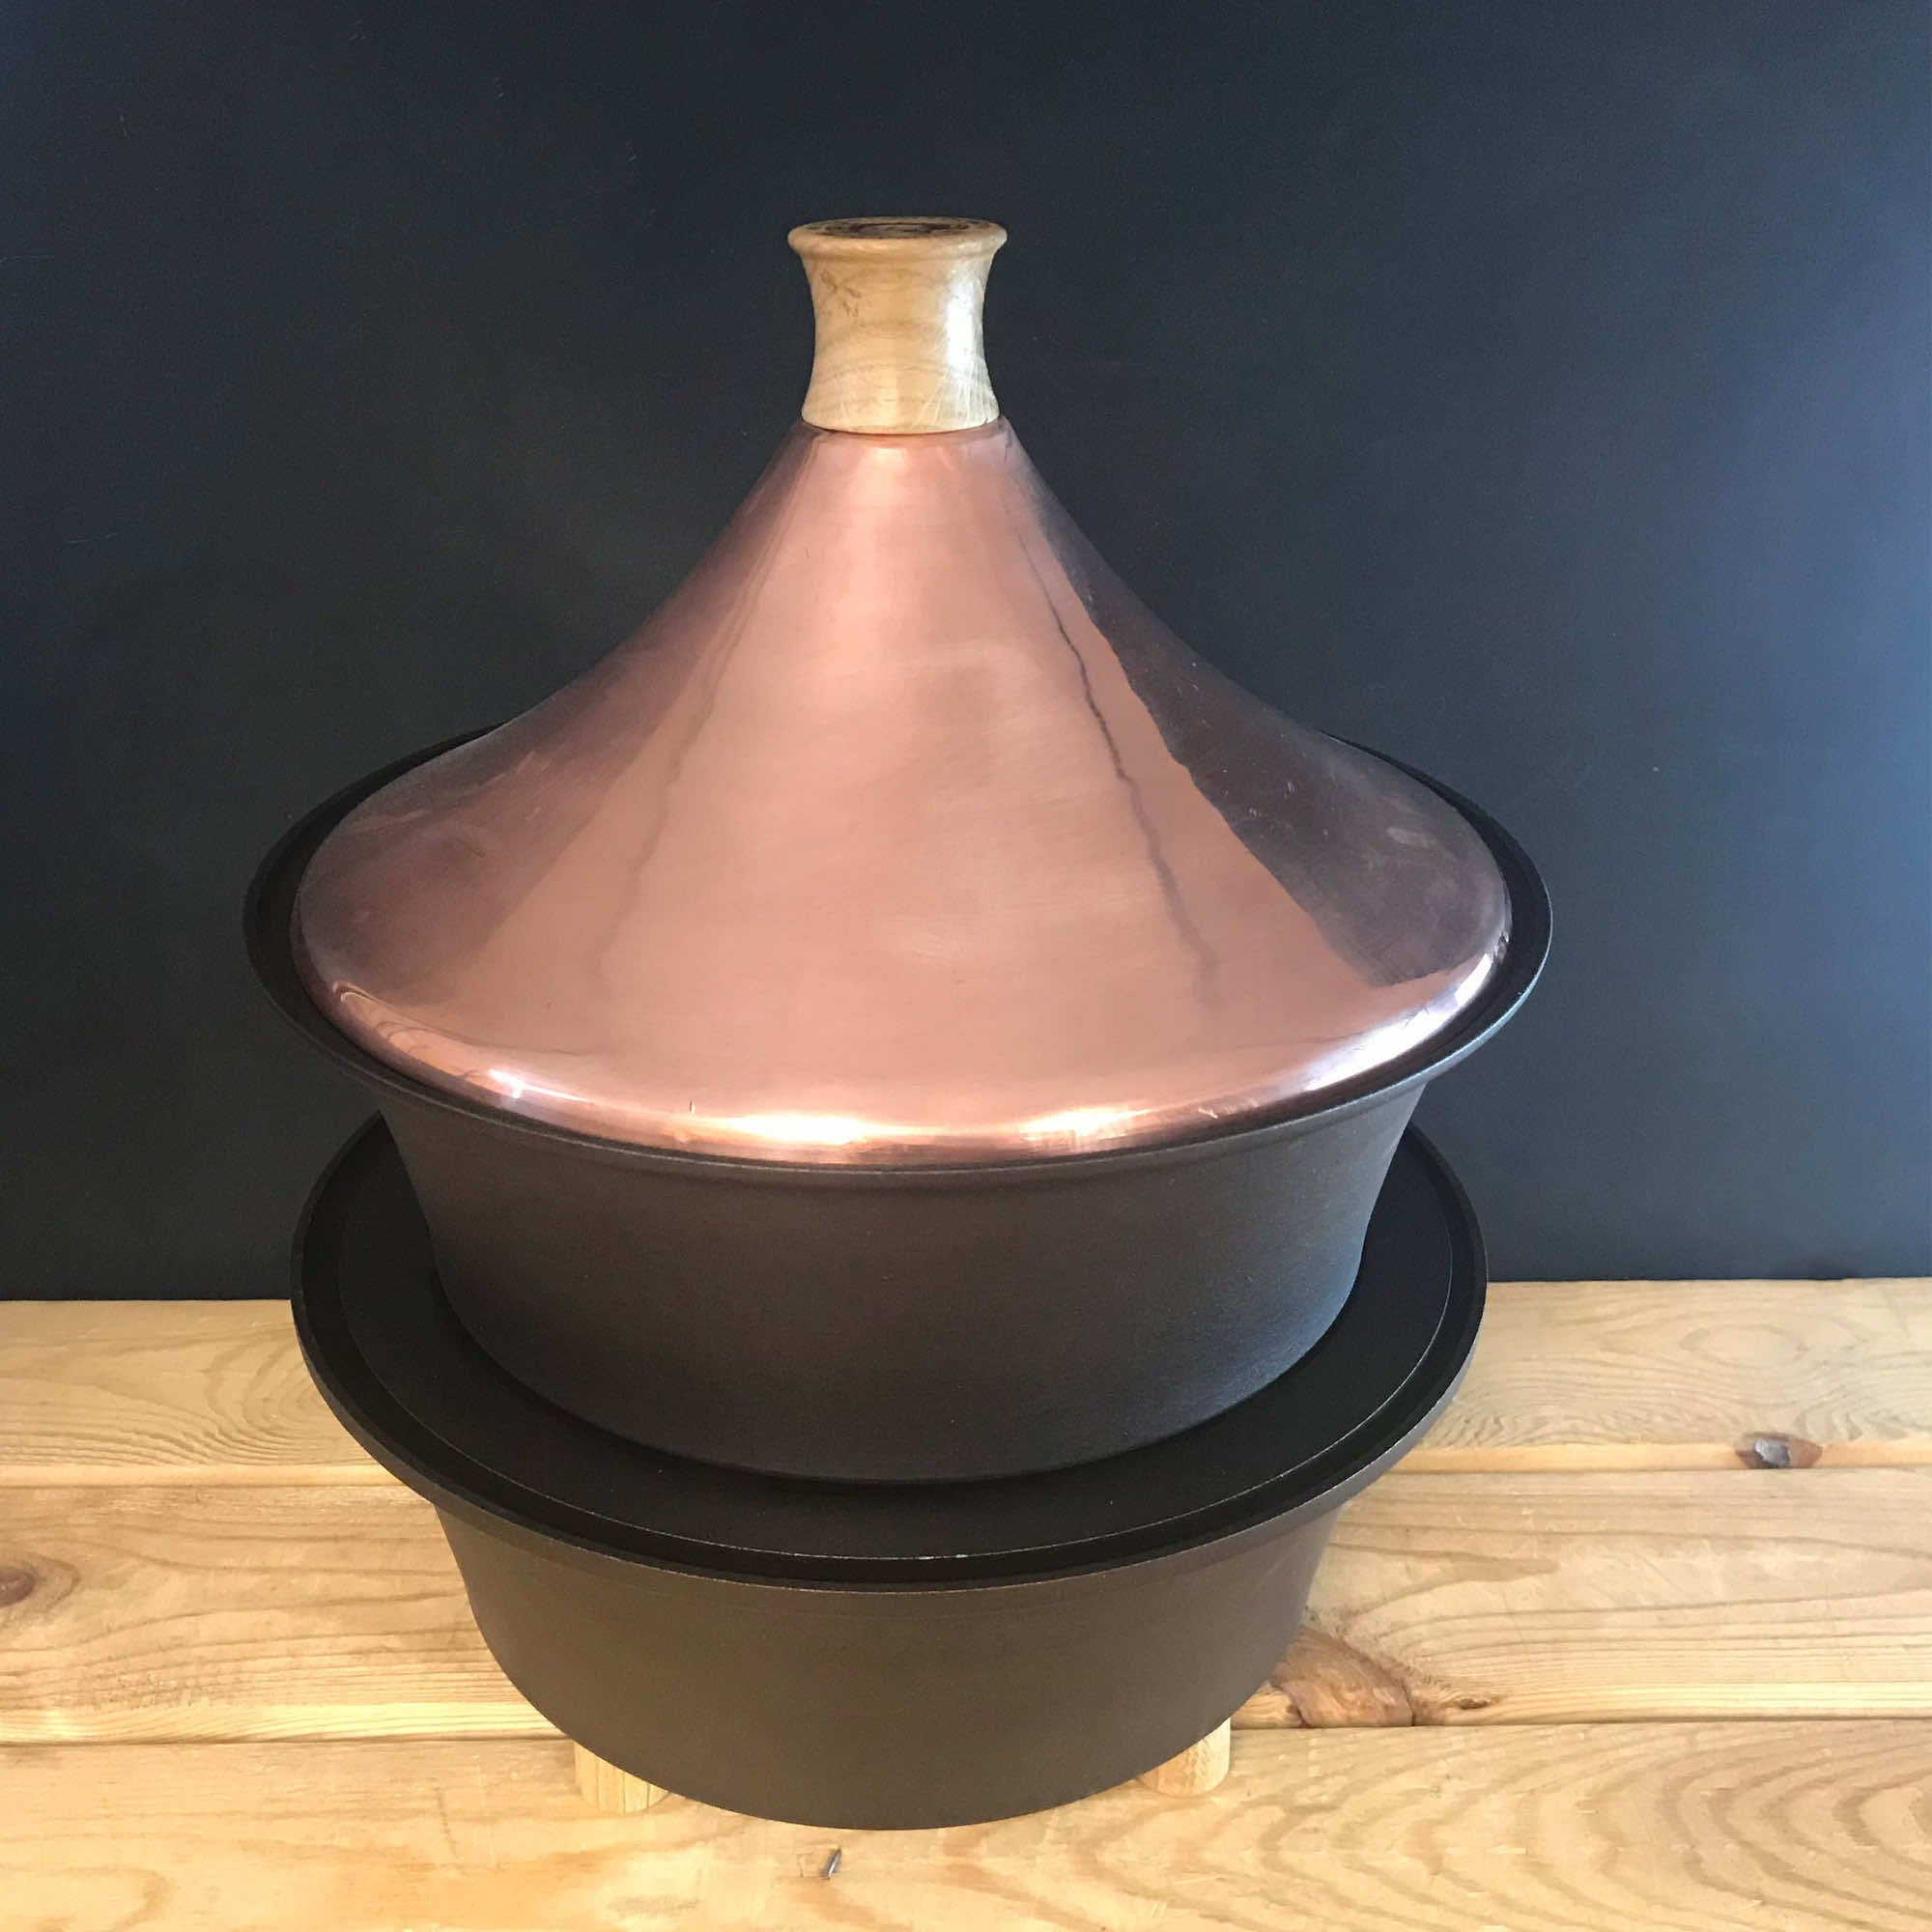 Copper Tagine Bowl on table